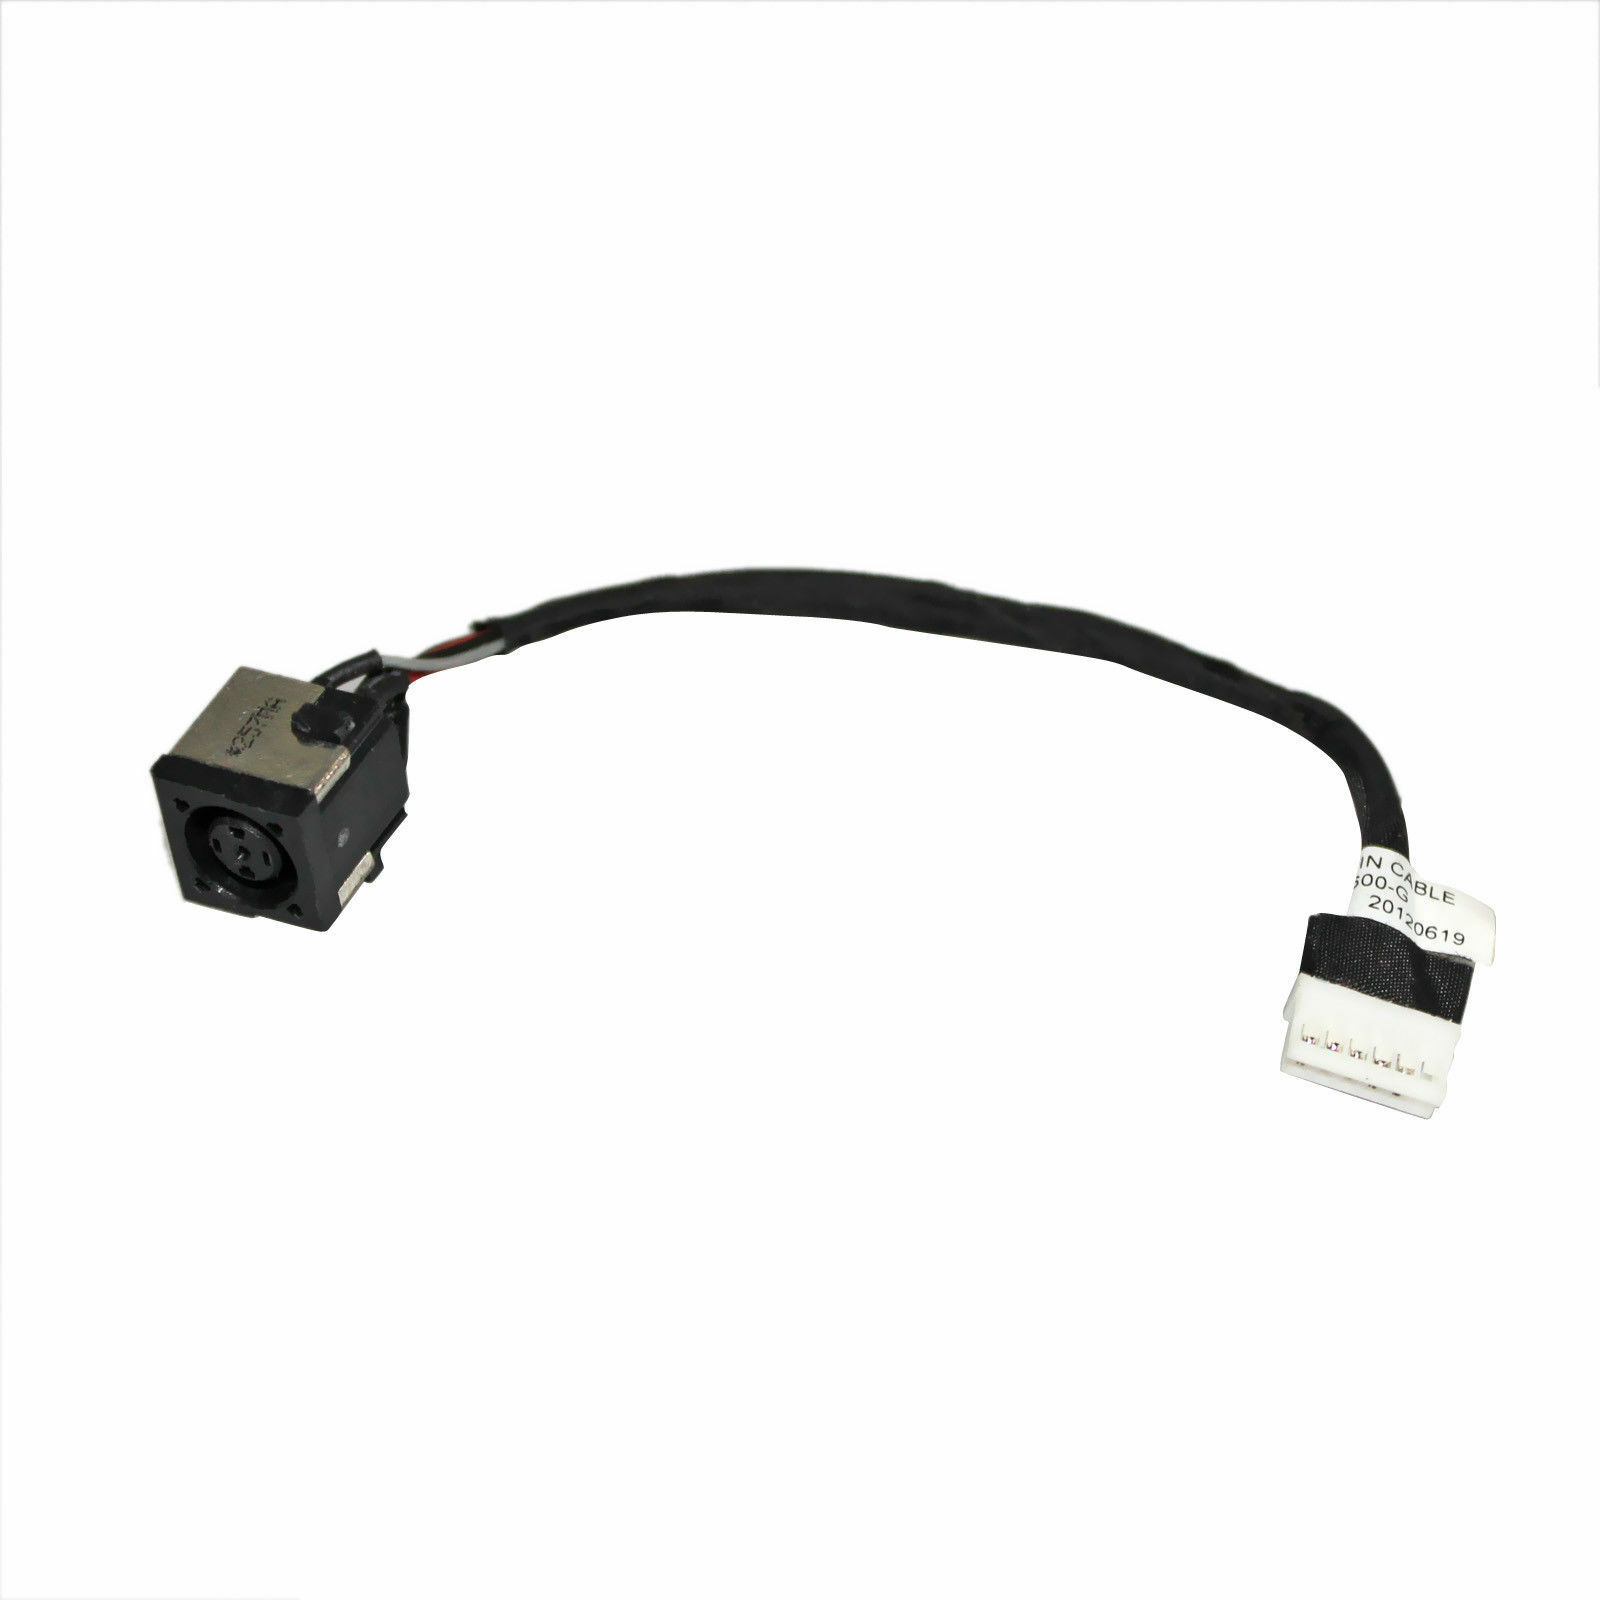 NEW DC POWER JACK CABLE For Dell PF8JG CN-0JDX1R-GT074 SG1-0595-ADO SK01